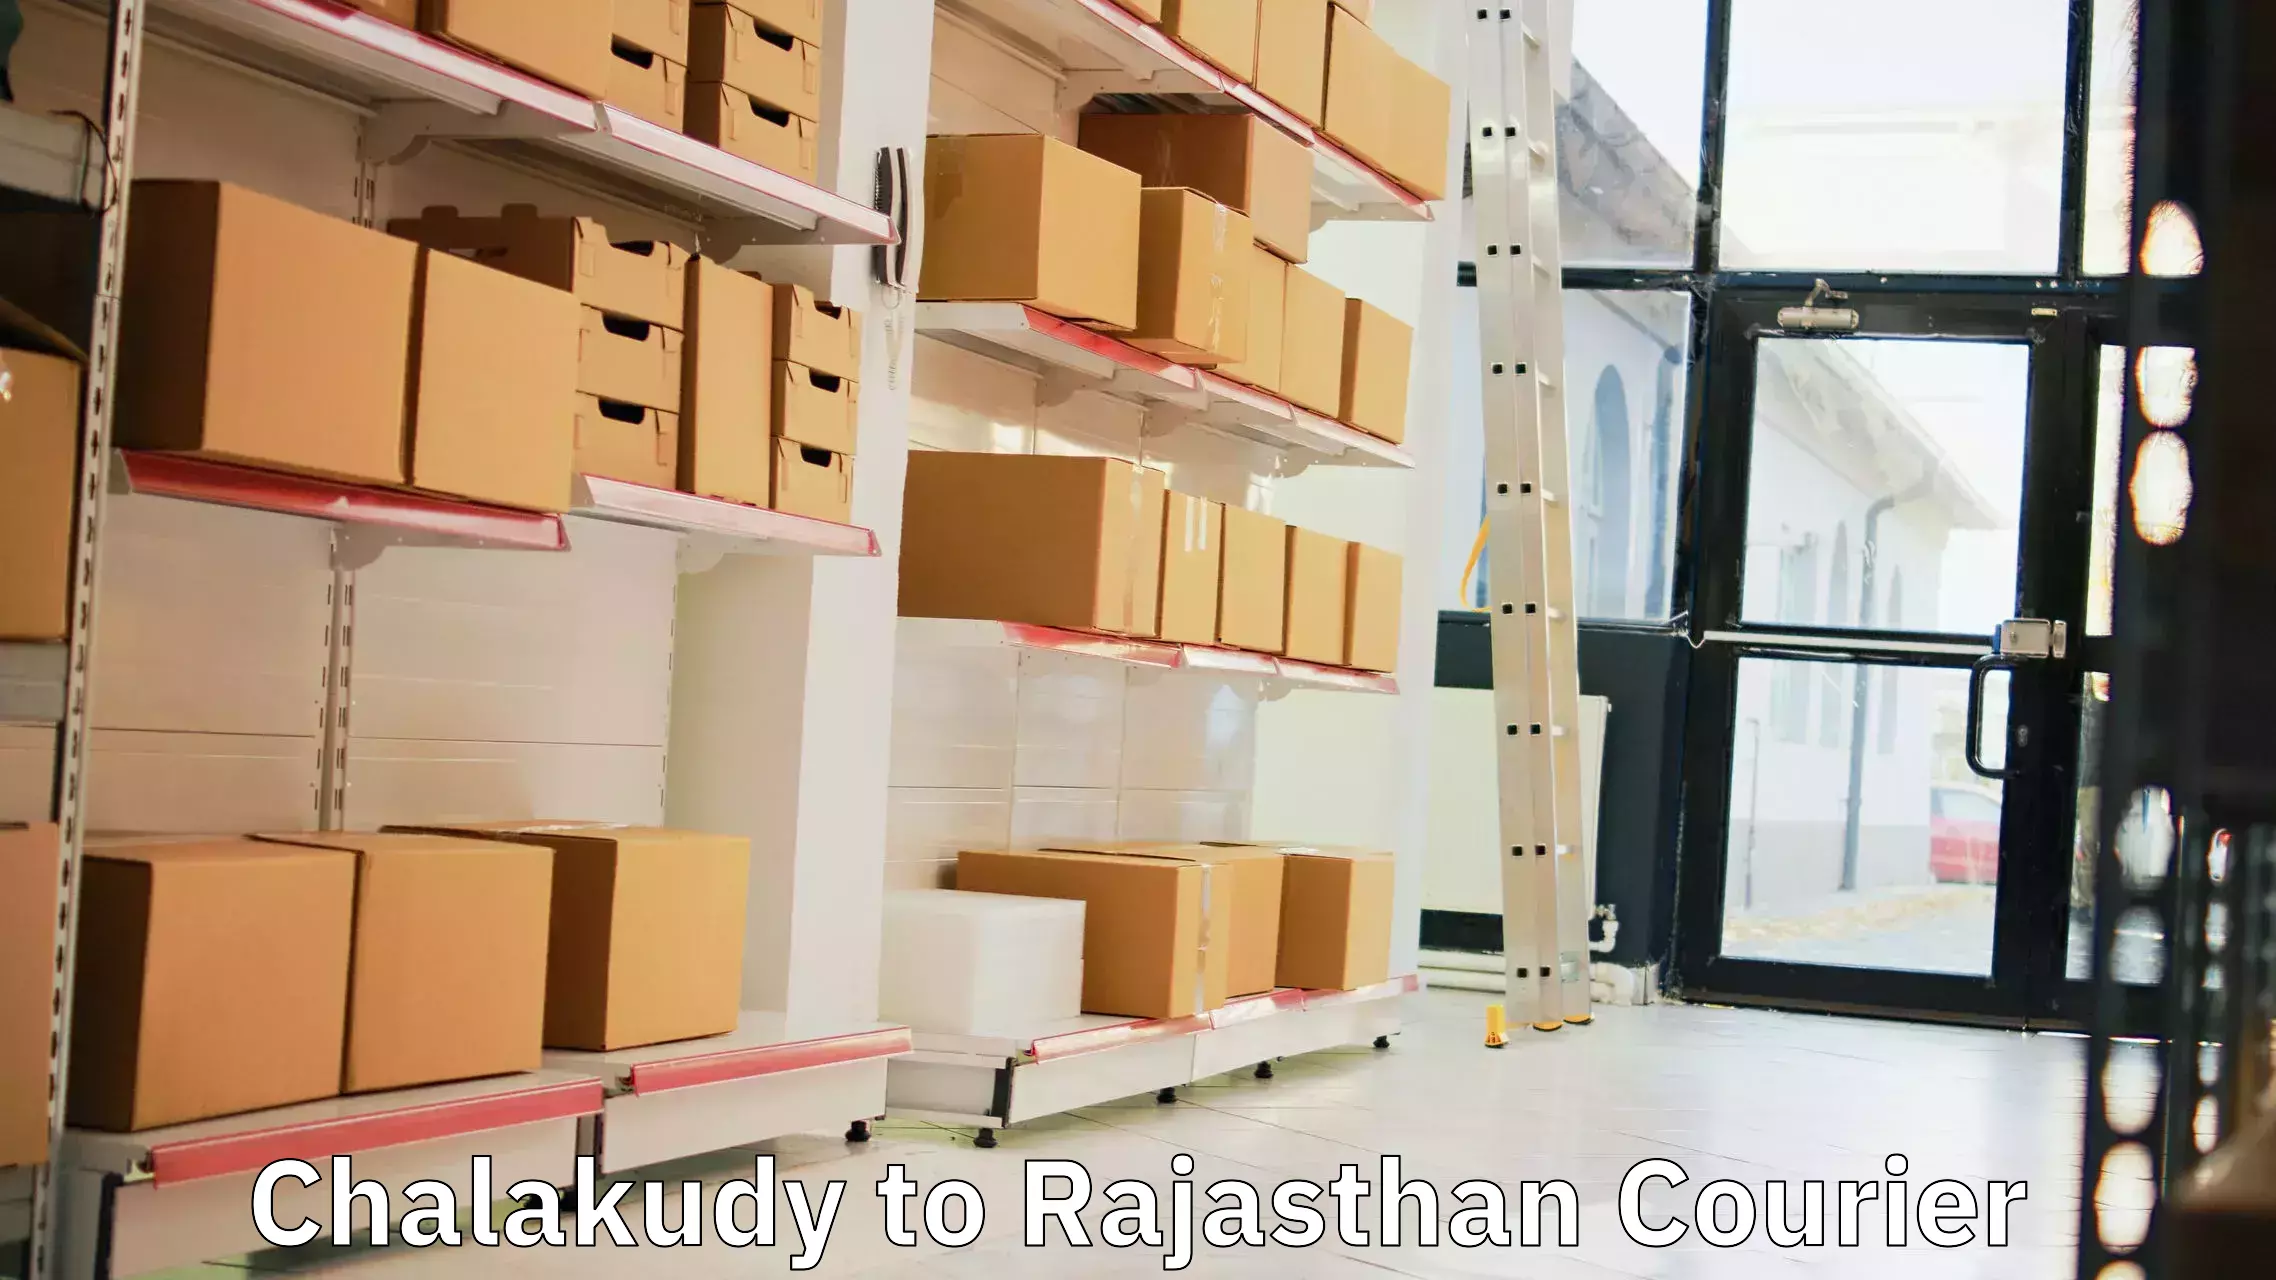 Courier insurance Chalakudy to Rajasthan